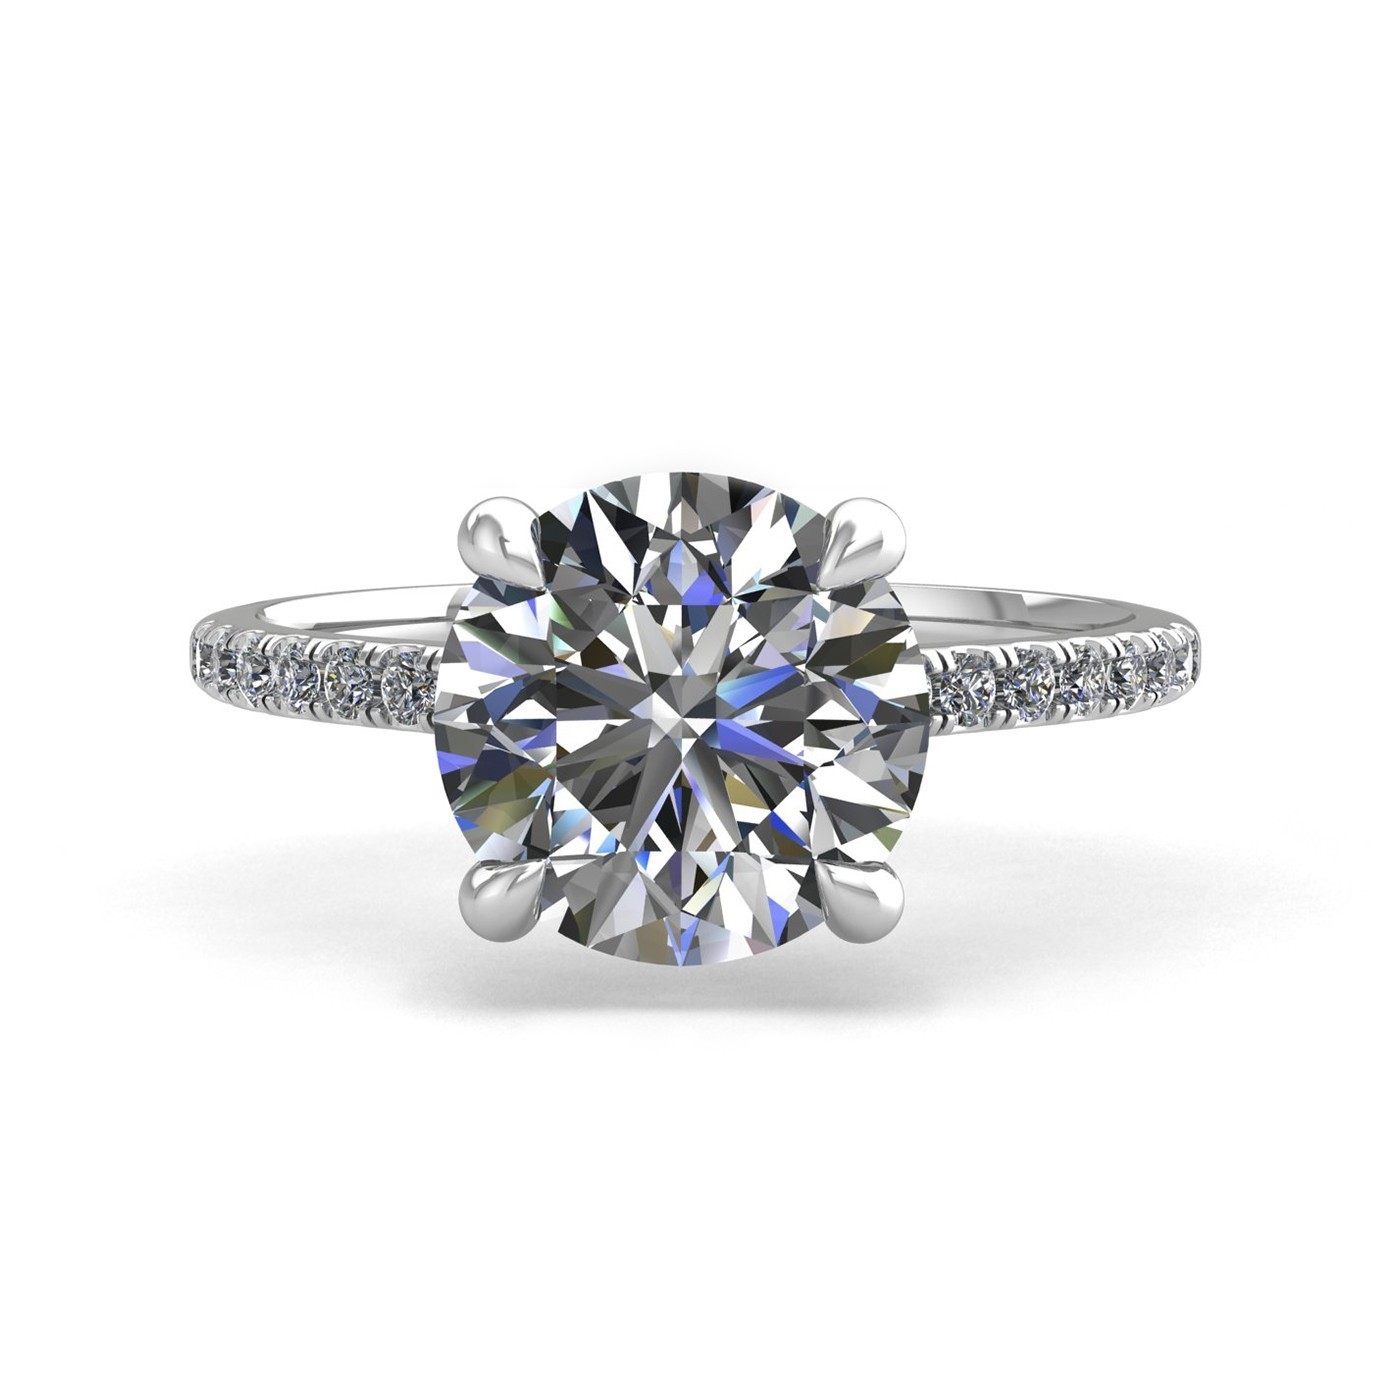 18k white gold 2.5ct 4 prongs round cut diamond engagement ring with whisper thin pavÉ set band